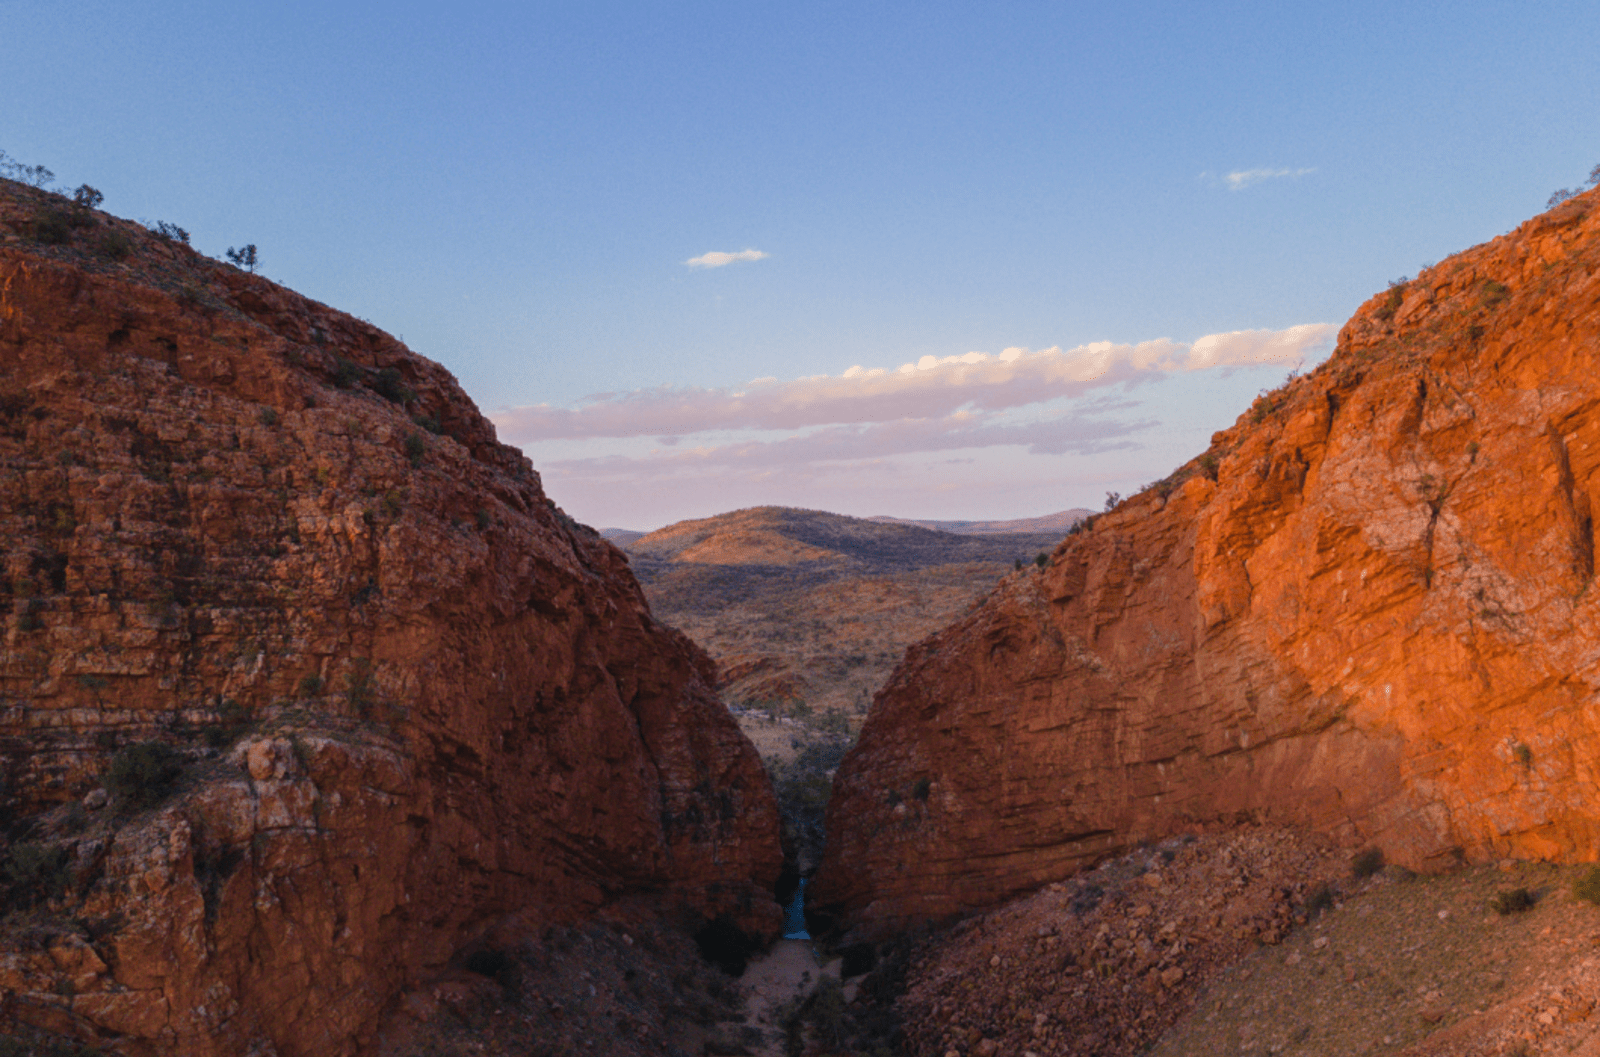 Simpsons Gap in the Northern Territory